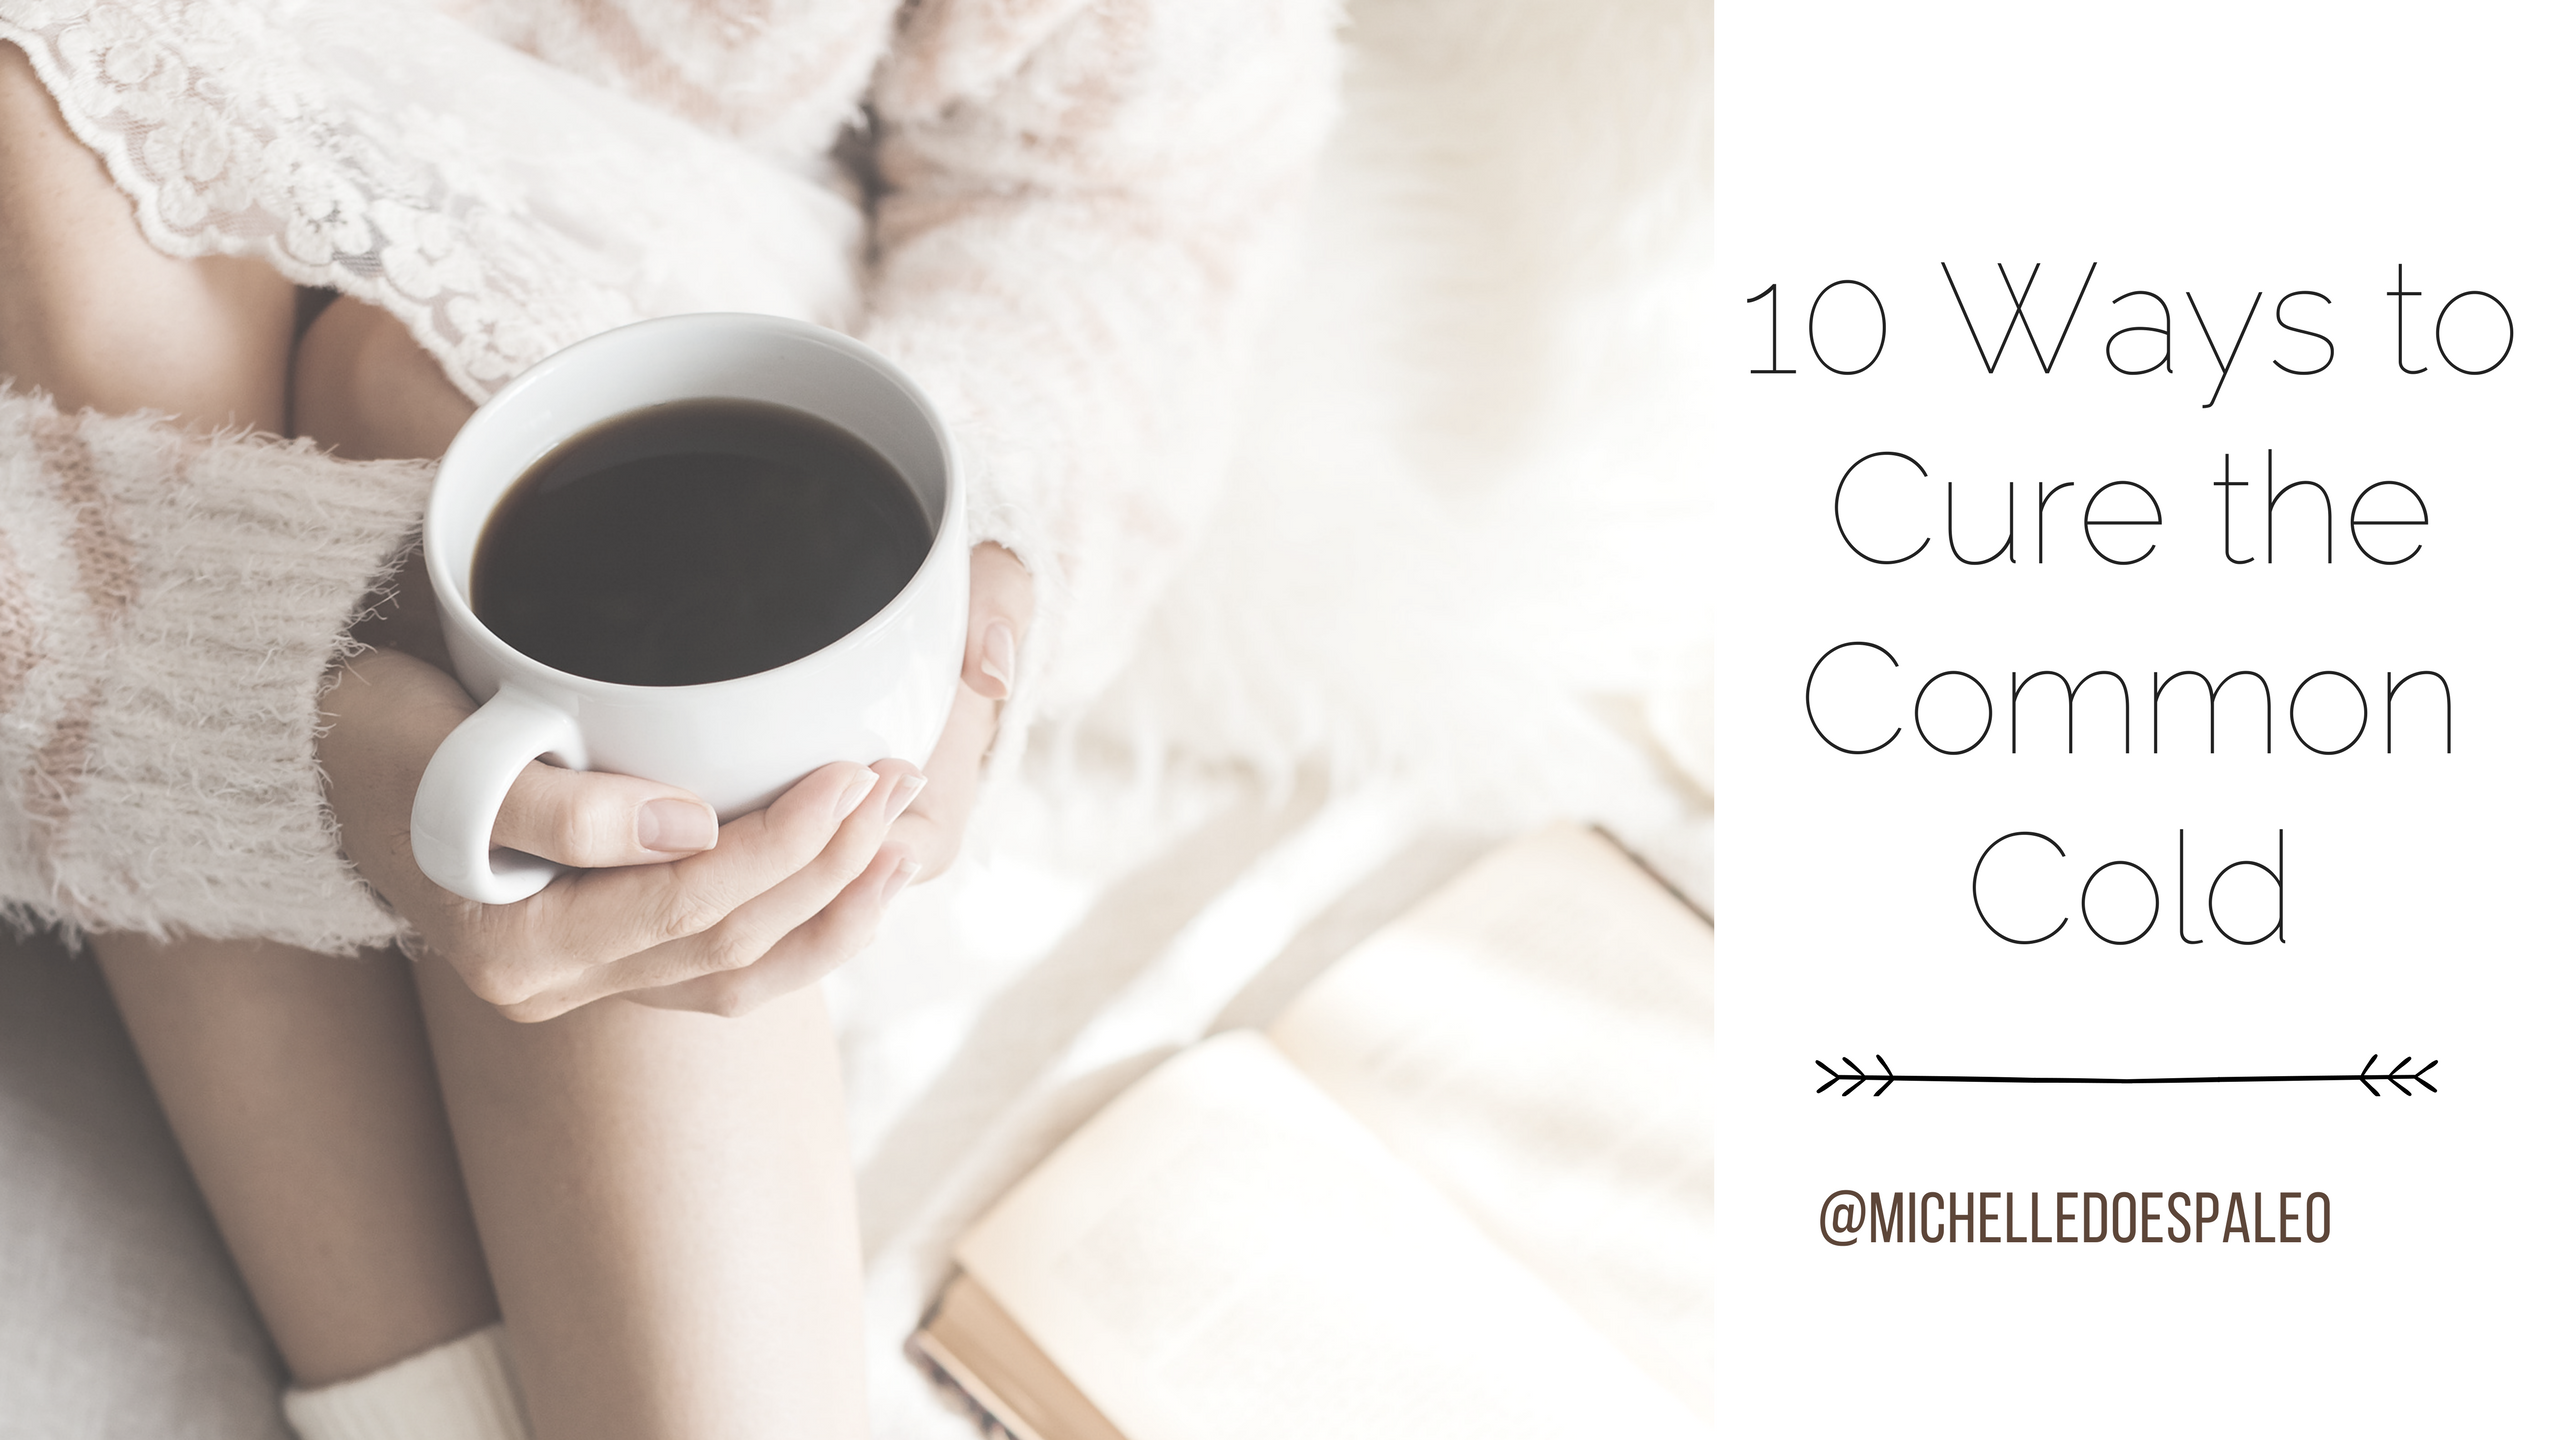 10 Ways to Cure the Common Cold